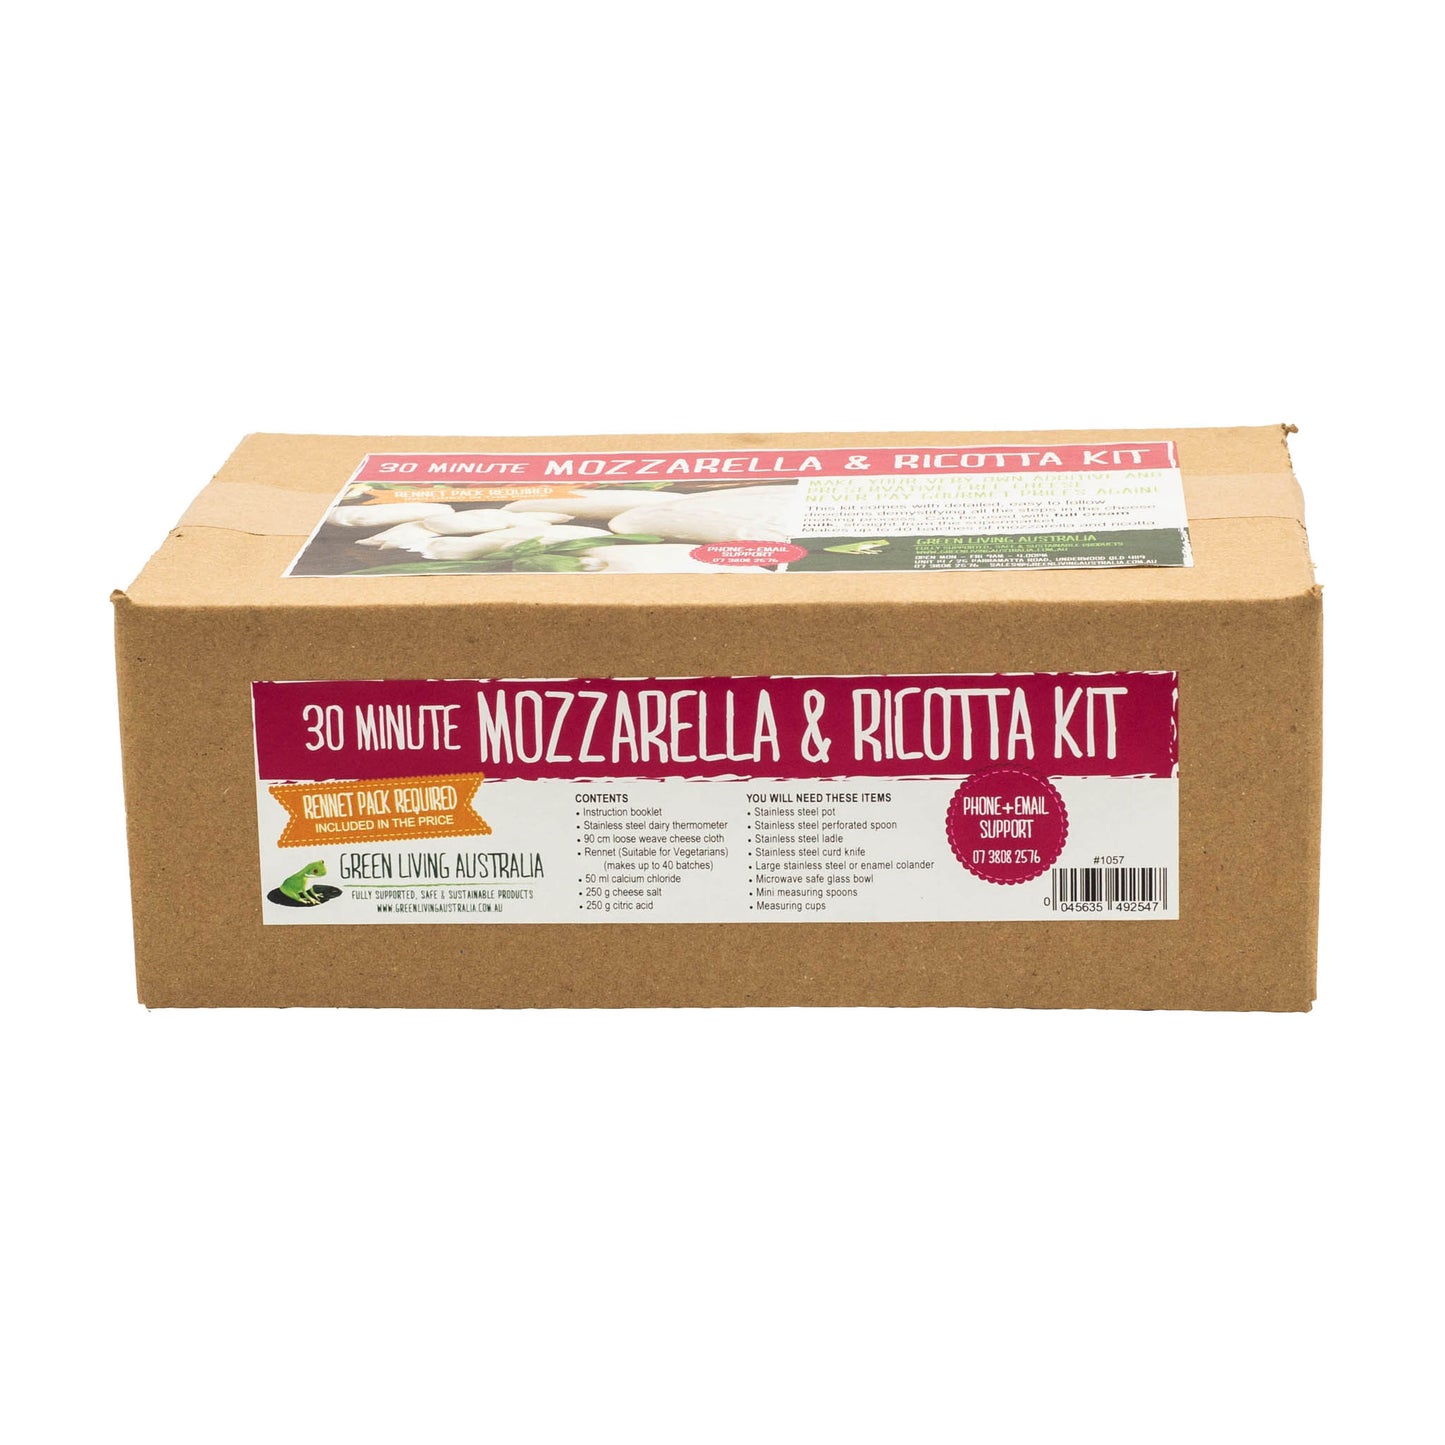 Mozzarella and Ricotta cheese making kit contents and instructions